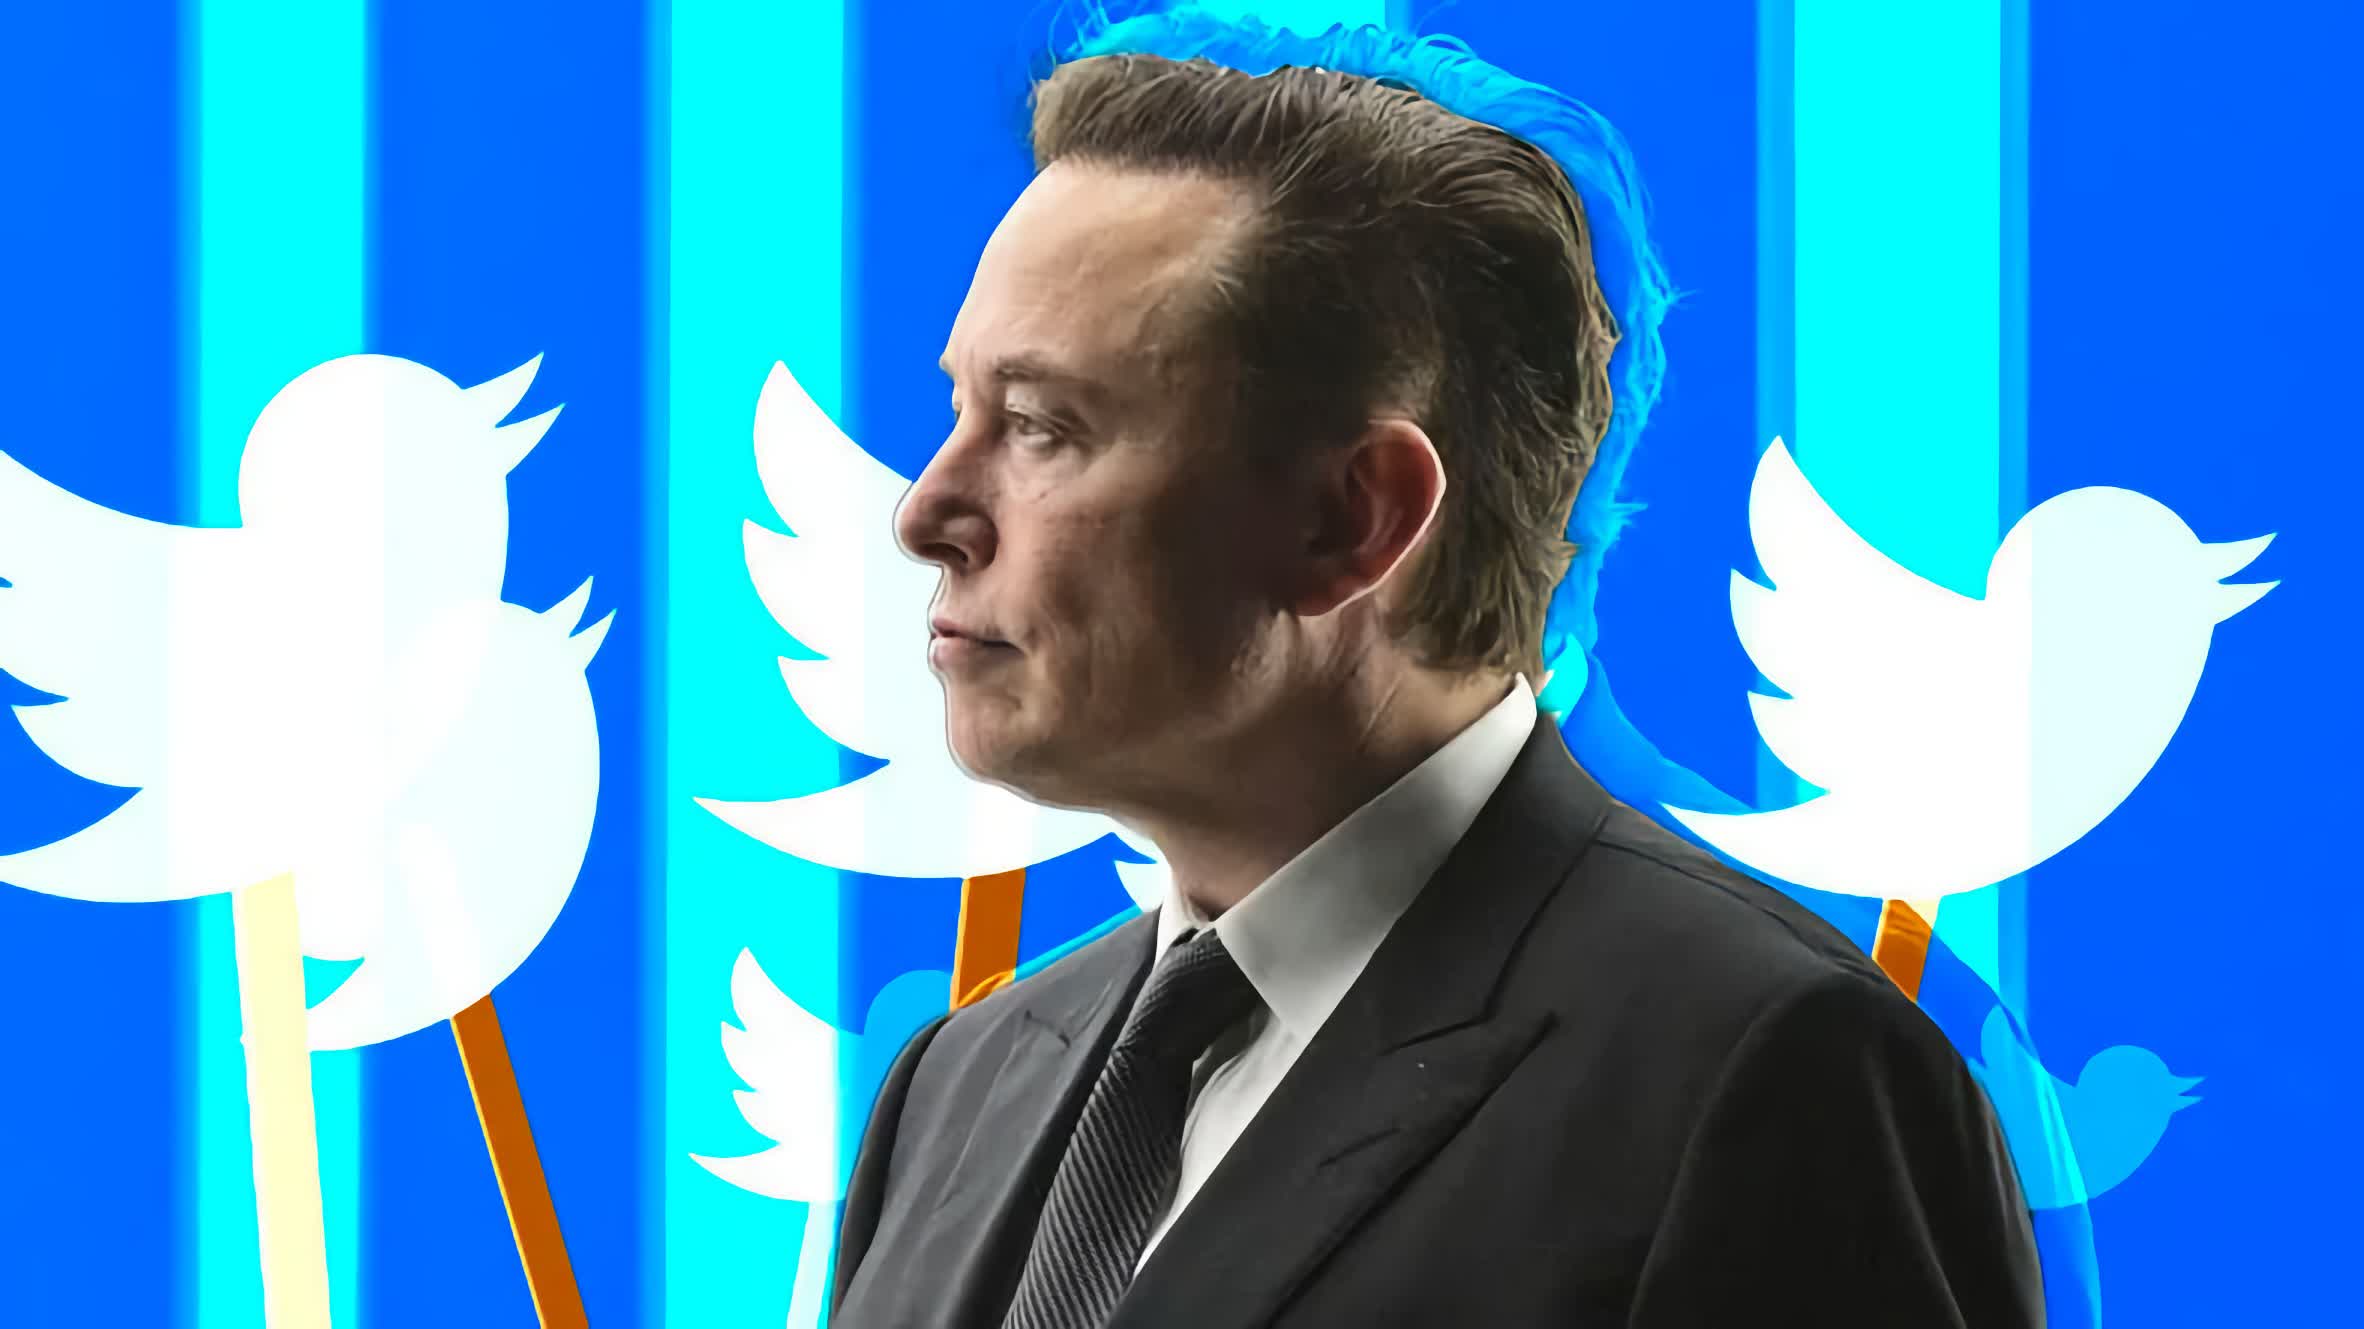 Elon Musk says he is overpaying for Twitter but still believes in its incredible potential